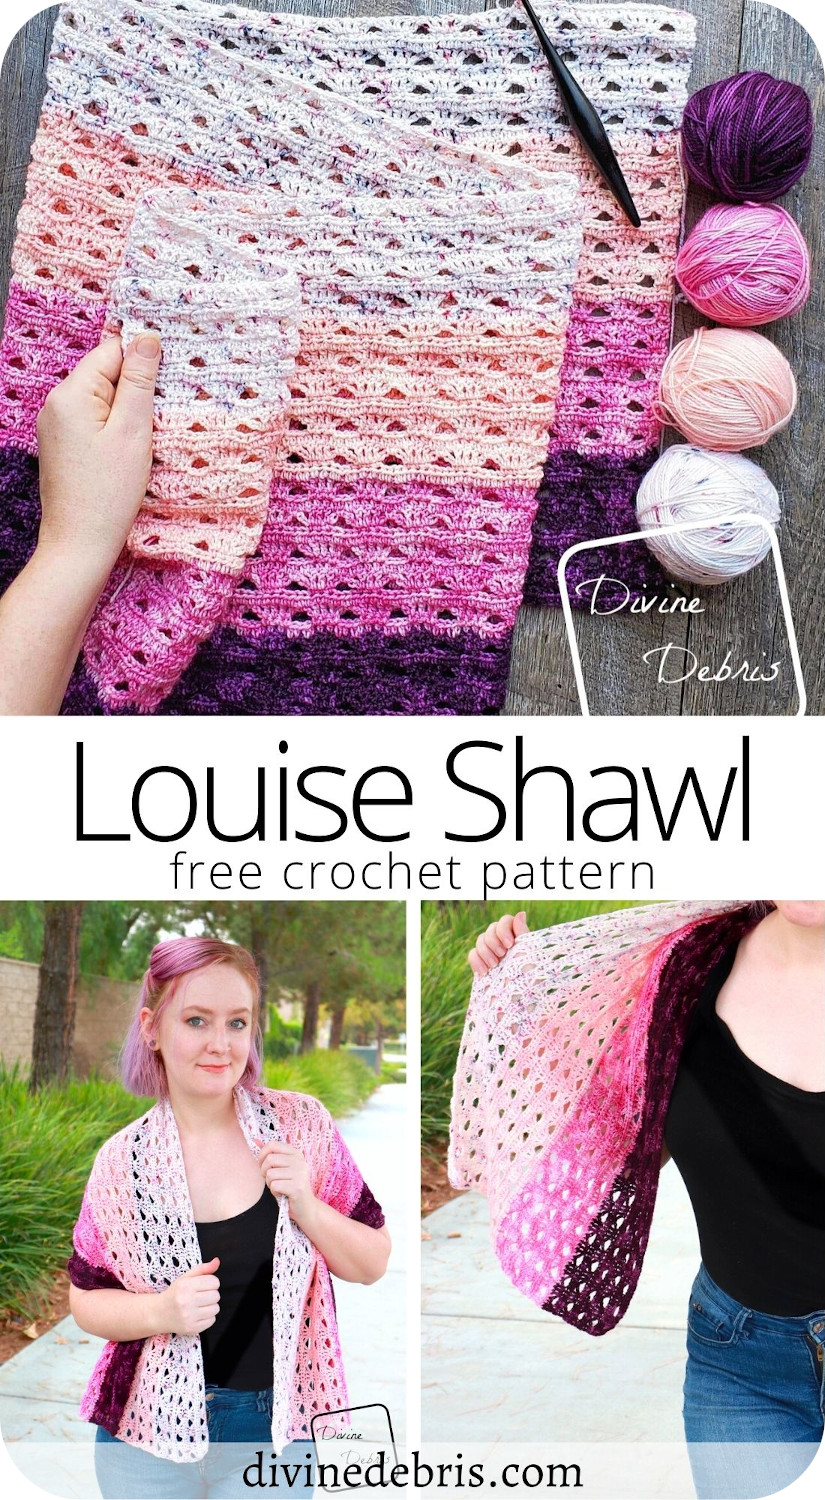 Get your fingering weight yarn and make the simple, easy, and very customizable free crochet pattern - the Louise Shawl by DivineDebris.com